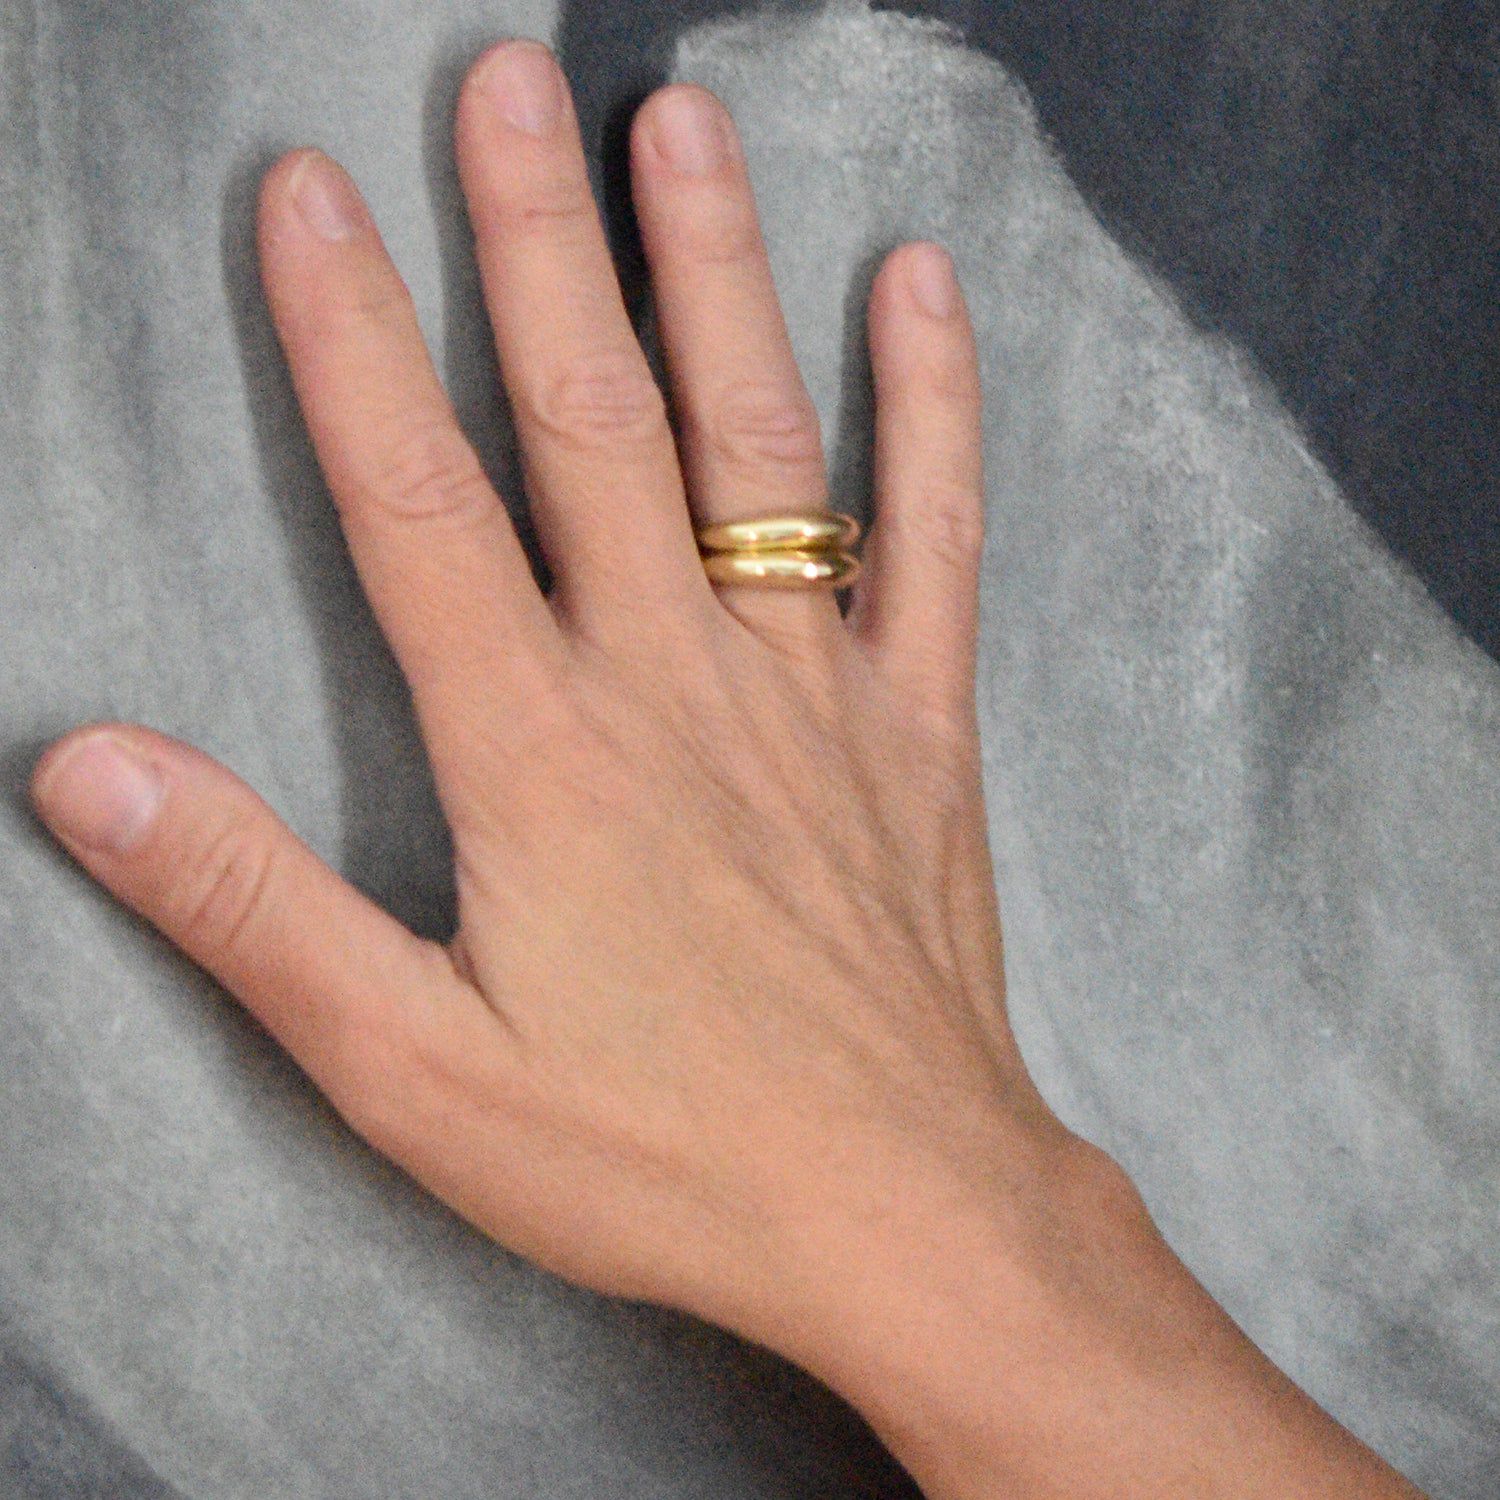 A photo of the 18k gold cast ring on a model's hand for scale.